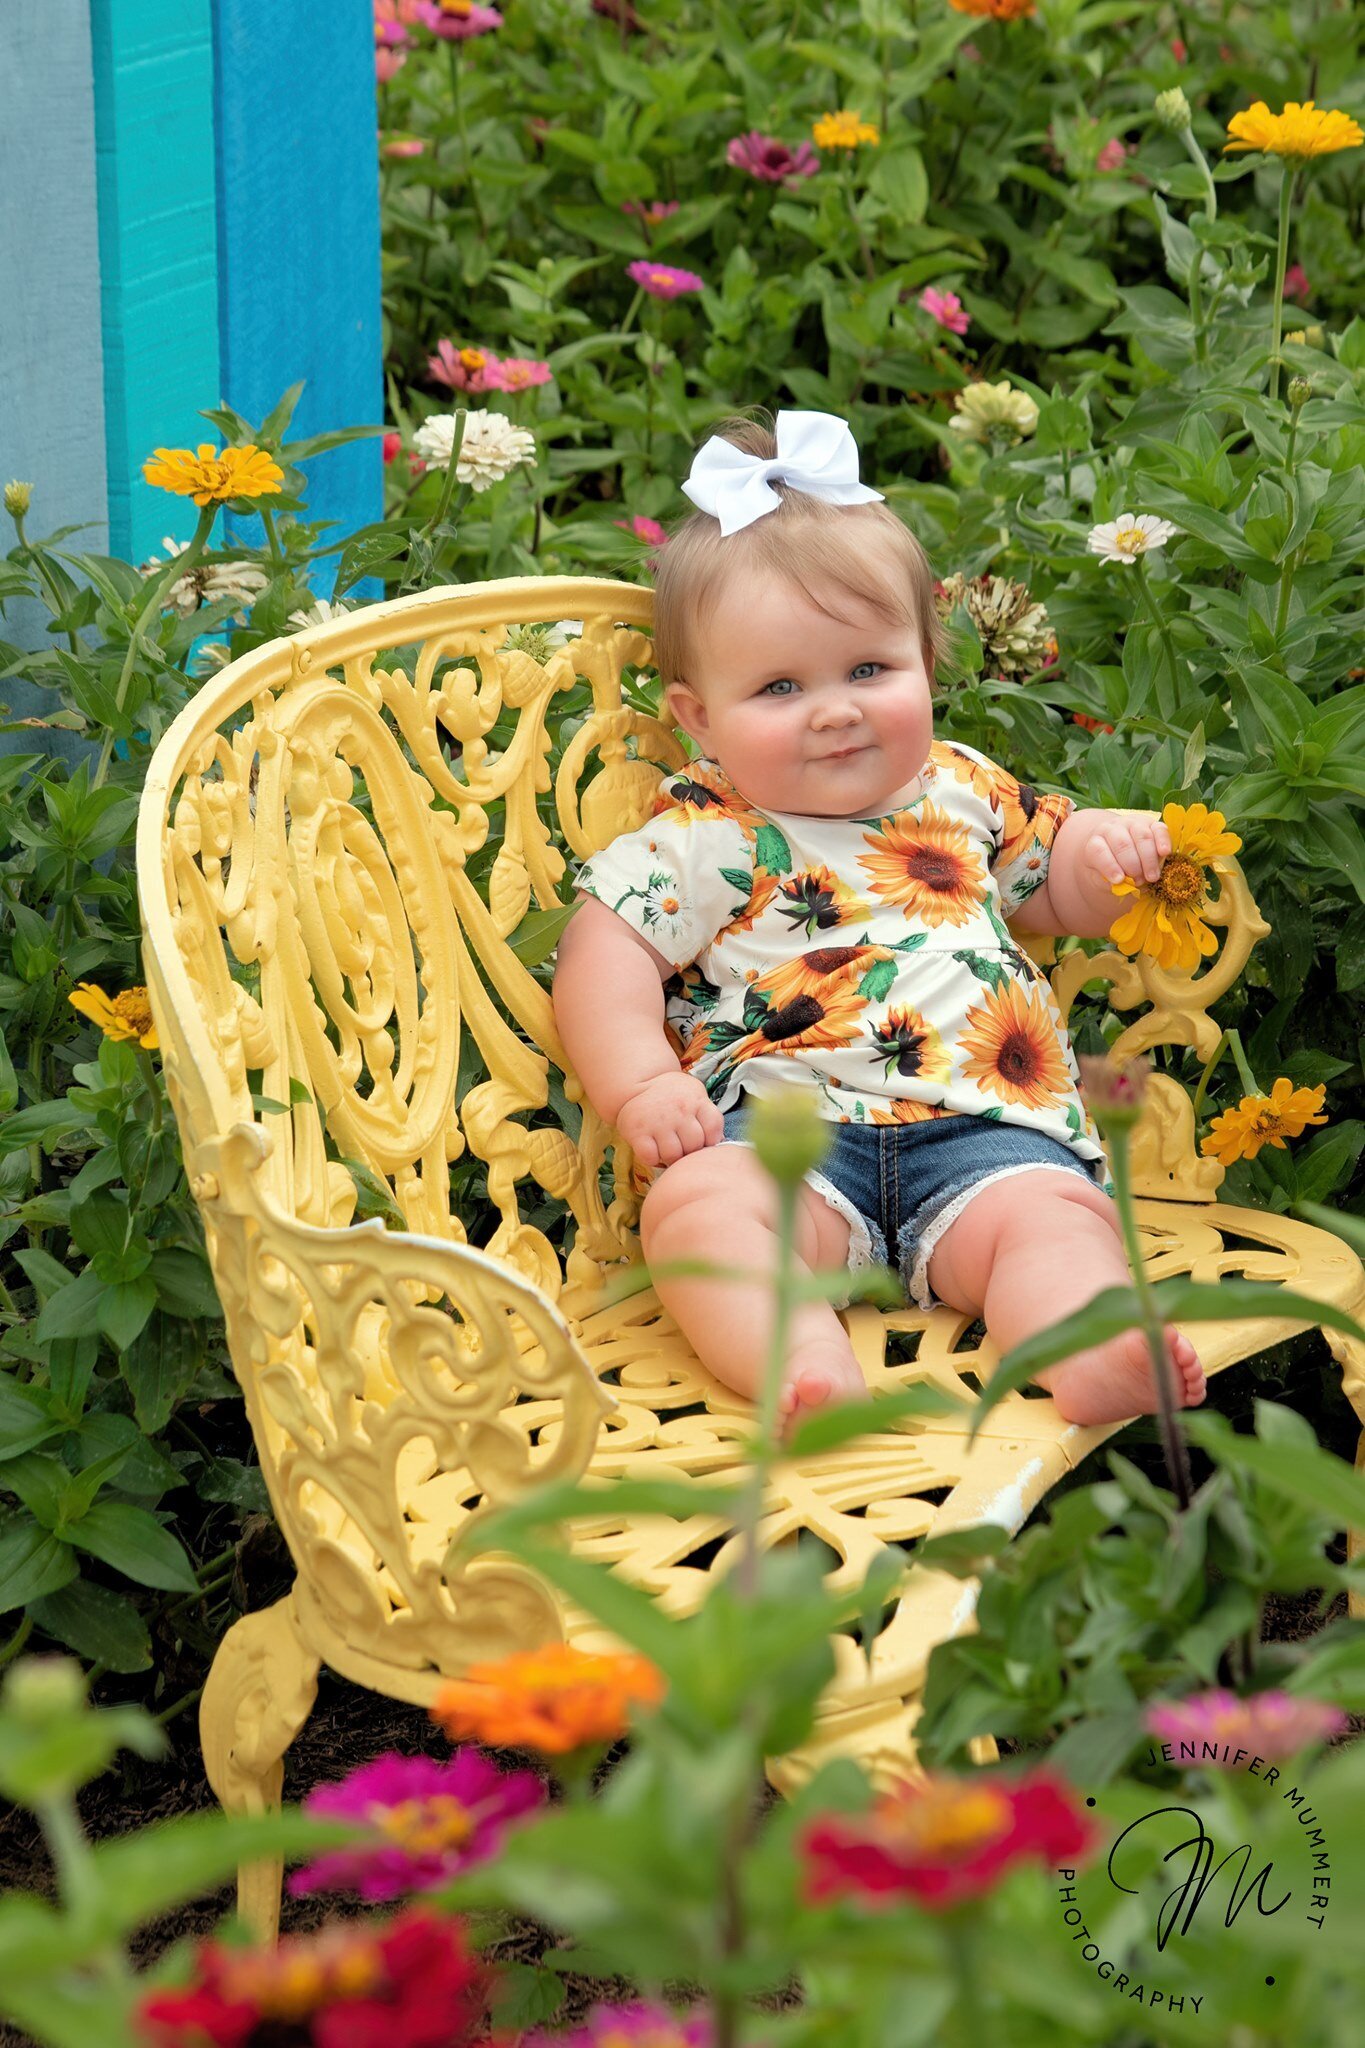 Baby in yellow chair sitting in flowers